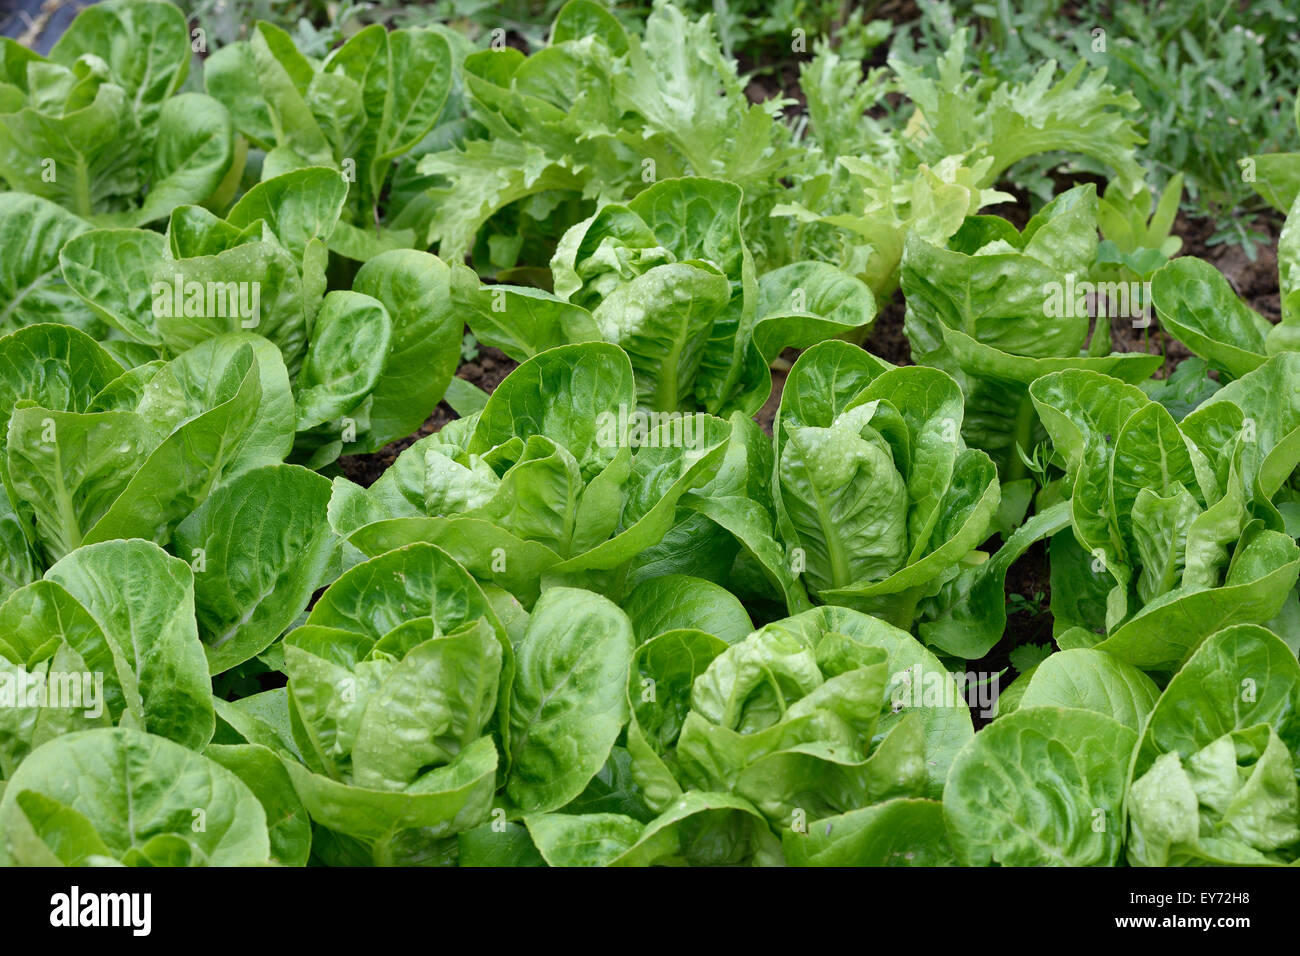 Differen kind of lettuces growing in a rows in a garden. Little Gem Romaine Lettuce, Endive and wild rocket. Organic gardening. Stock Photo